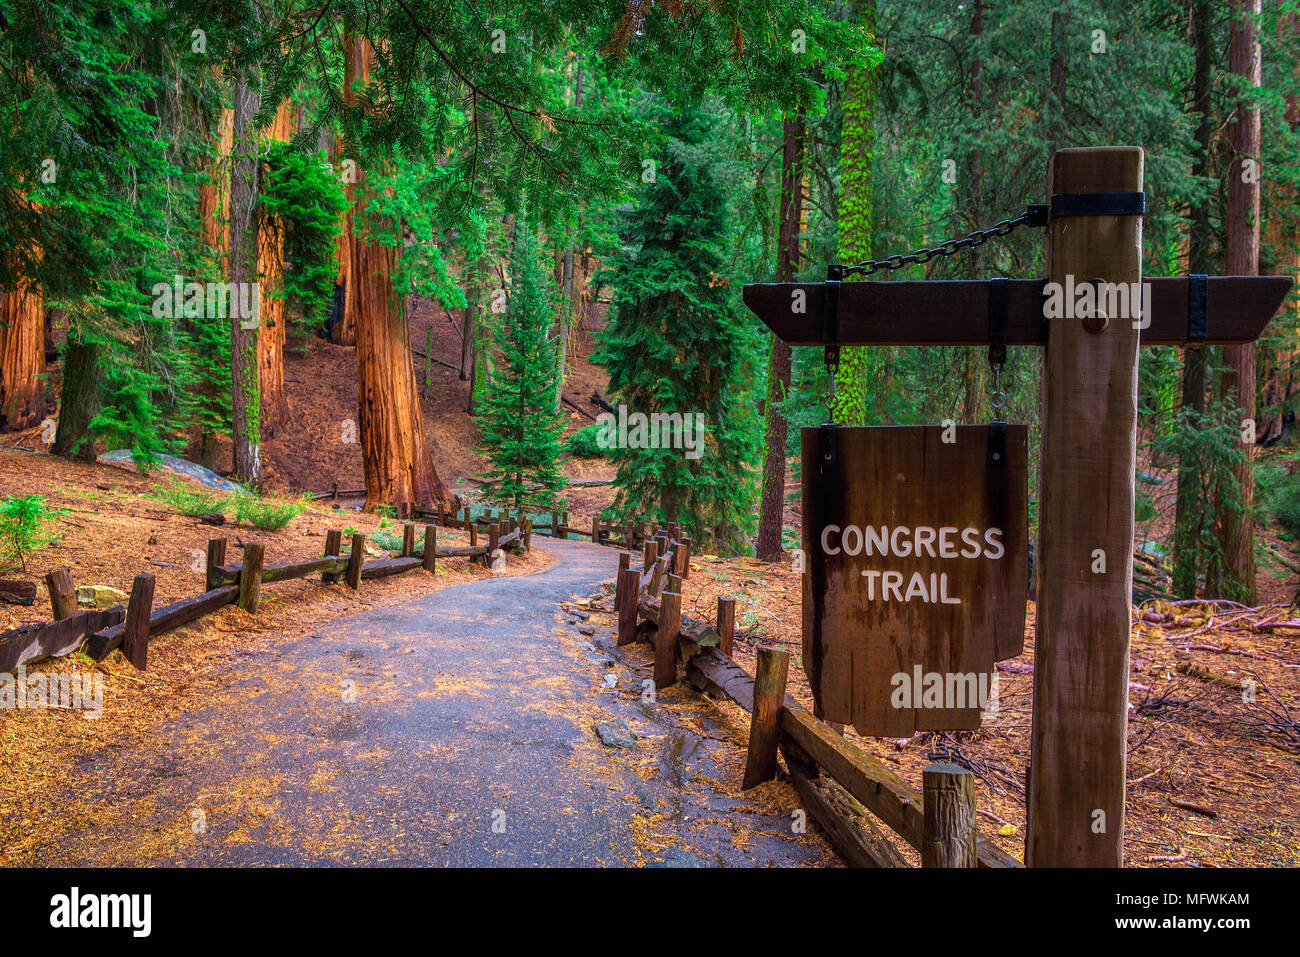 Congress Trail sign in Sequoia National Park Stock Photo